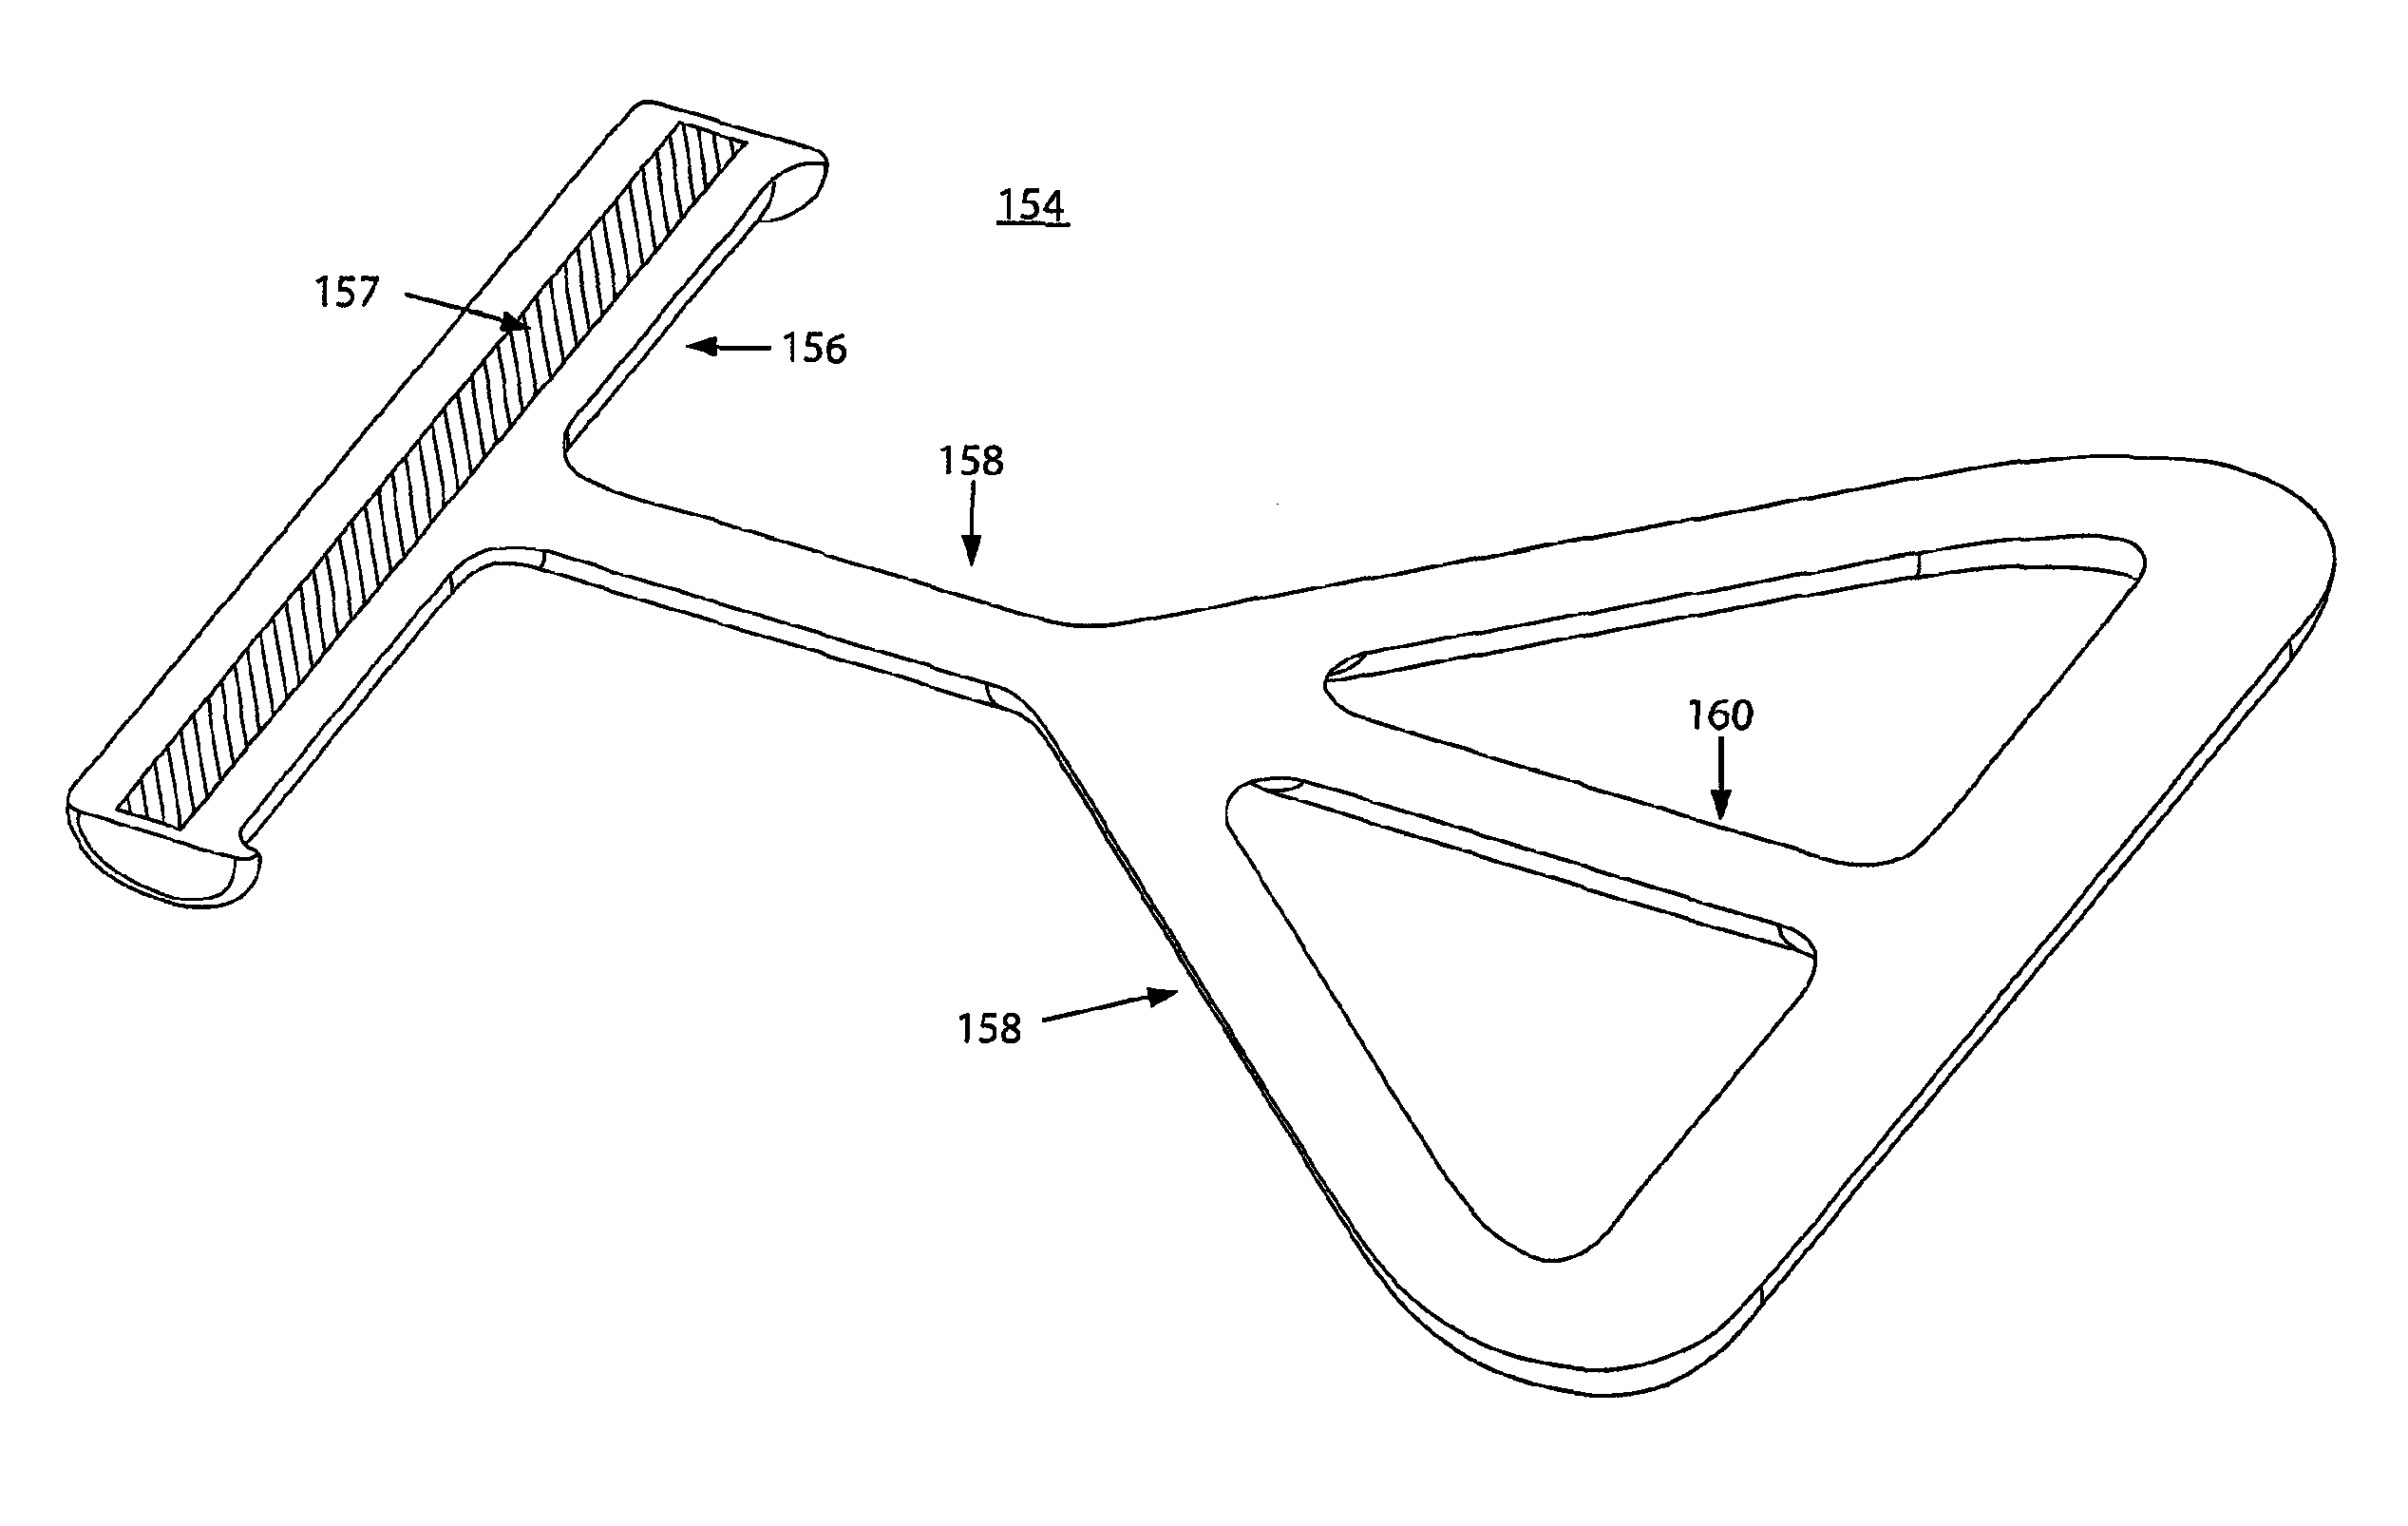 Methods and devices for assisting birth